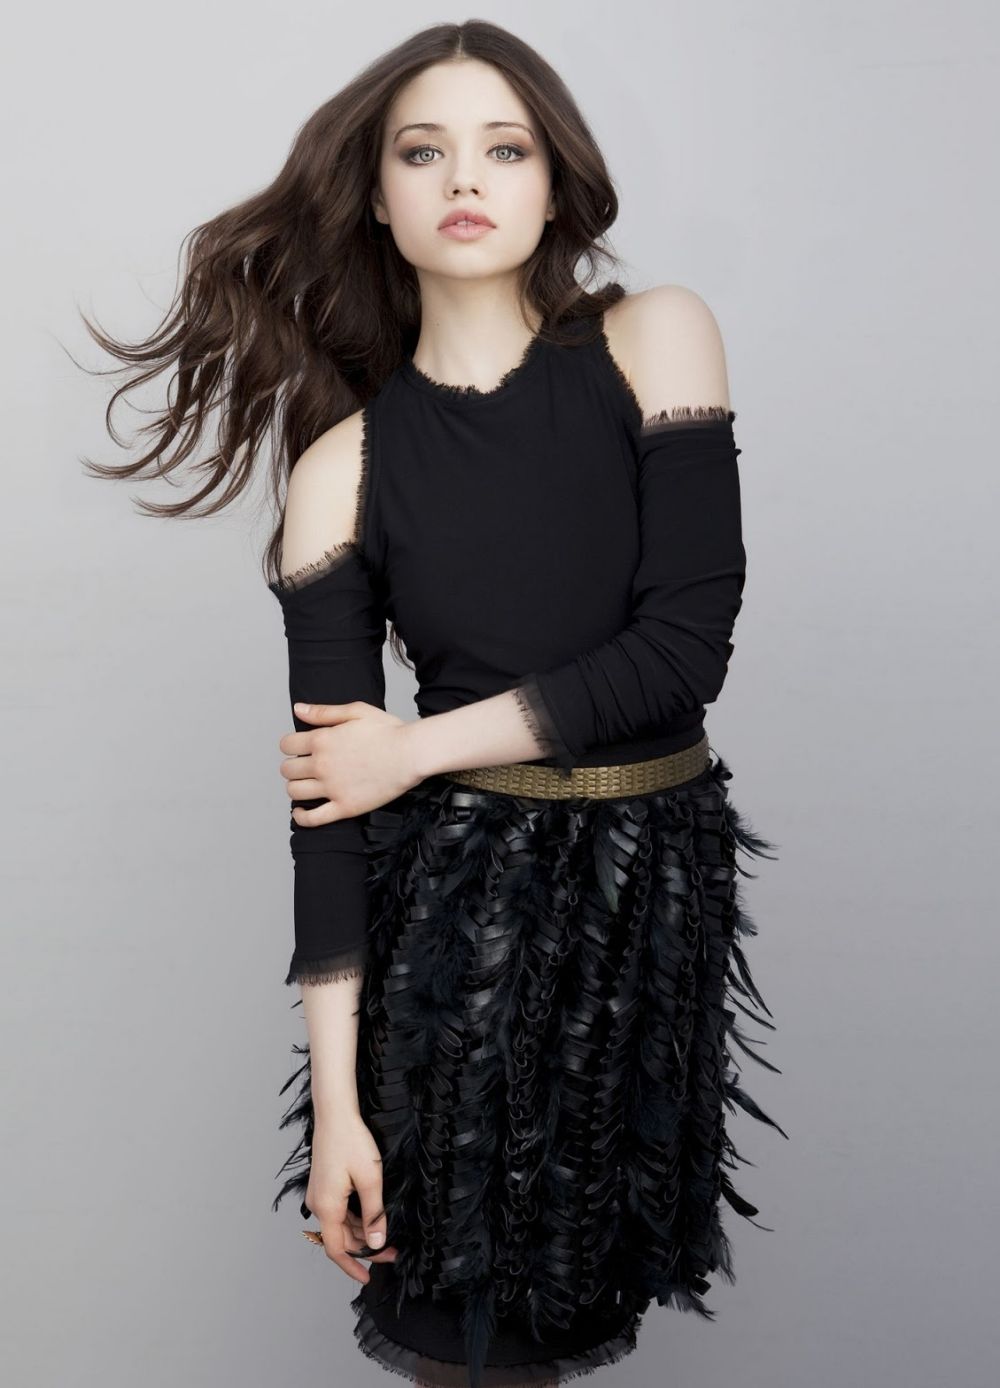 India Eisley Sexy and Hottest Photos , Latest Pics